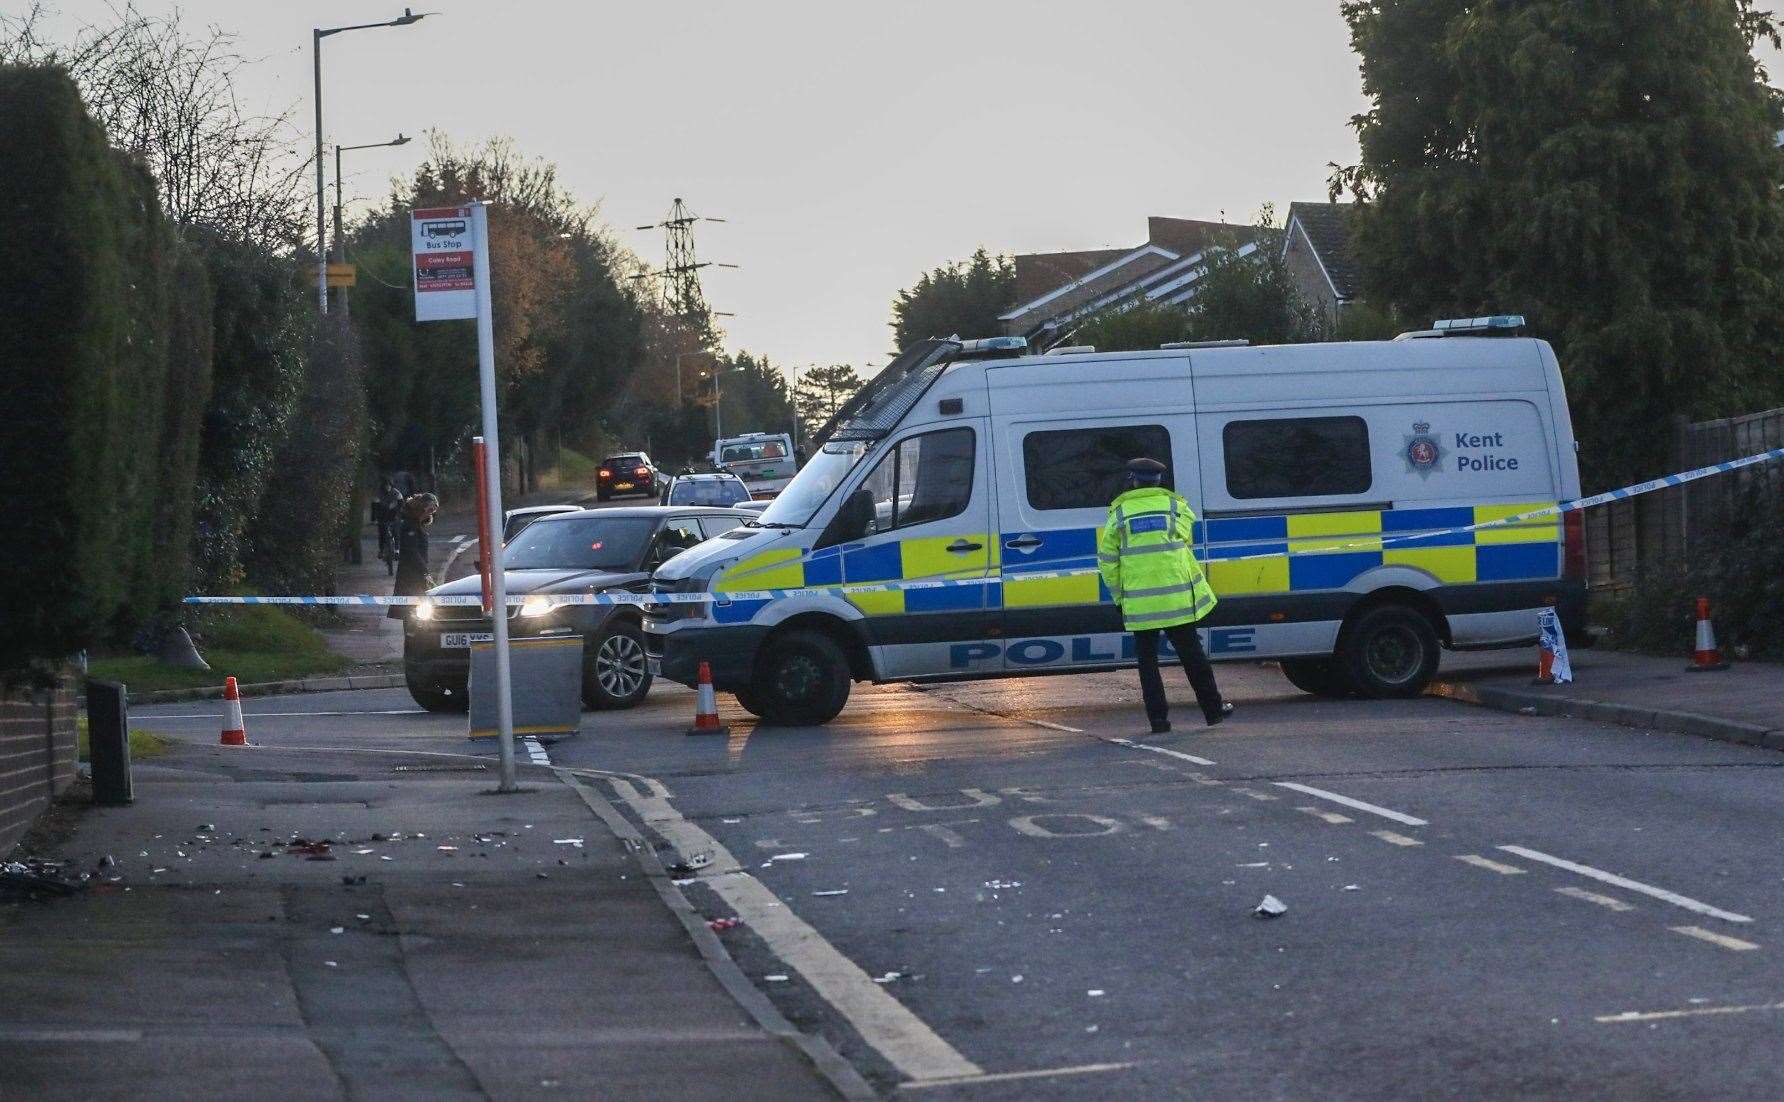 Police at the scene in Caley Road on Saturday. Picture: UKNIP